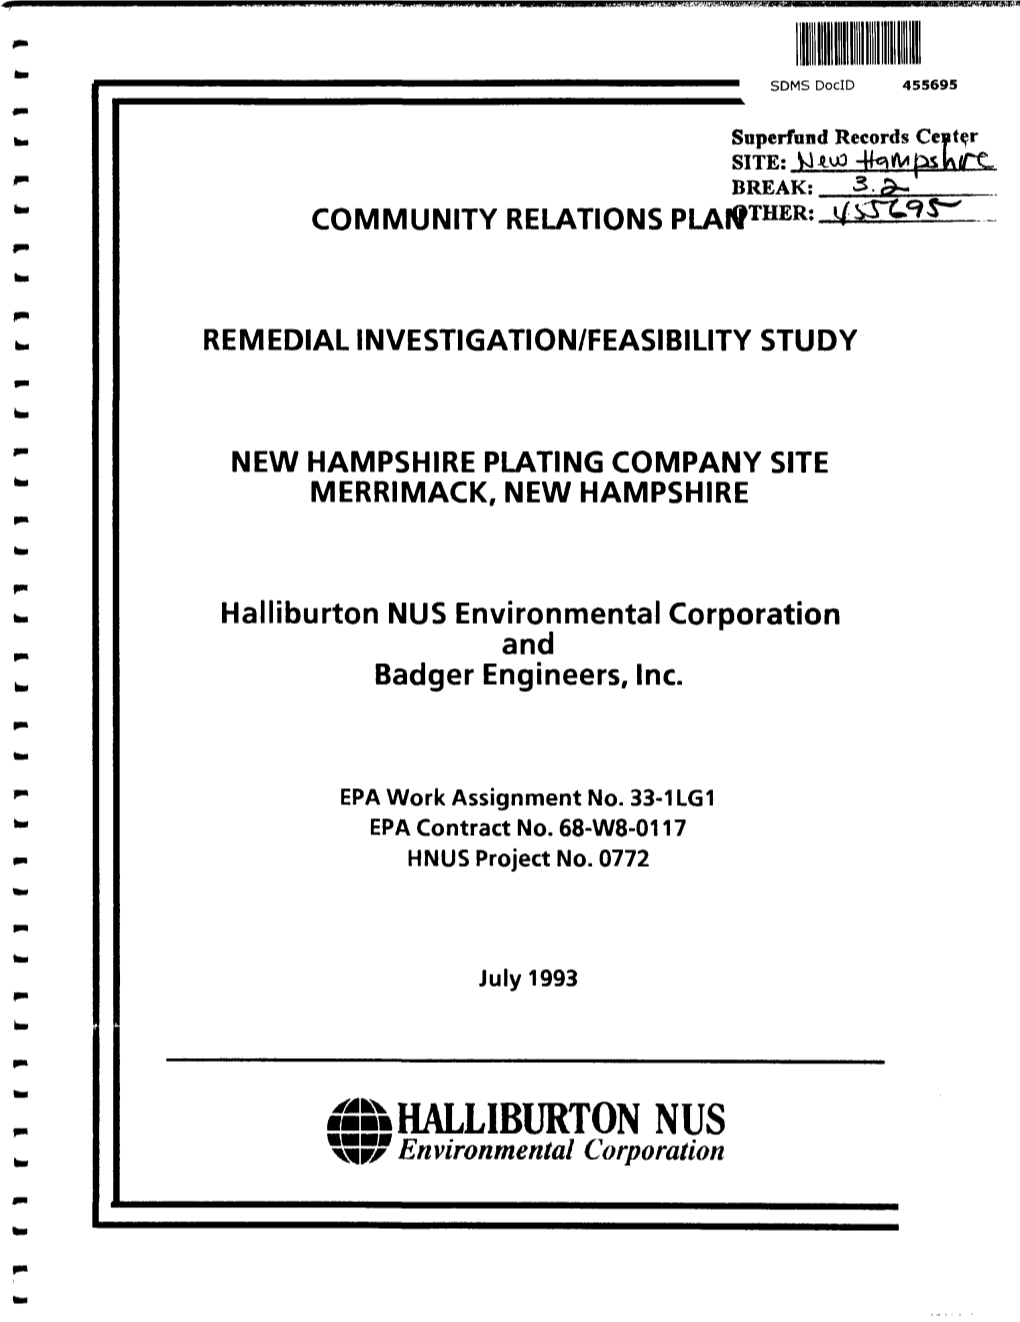 Community Relations Plan, New Hampshire Plating Superfund Site, W.A